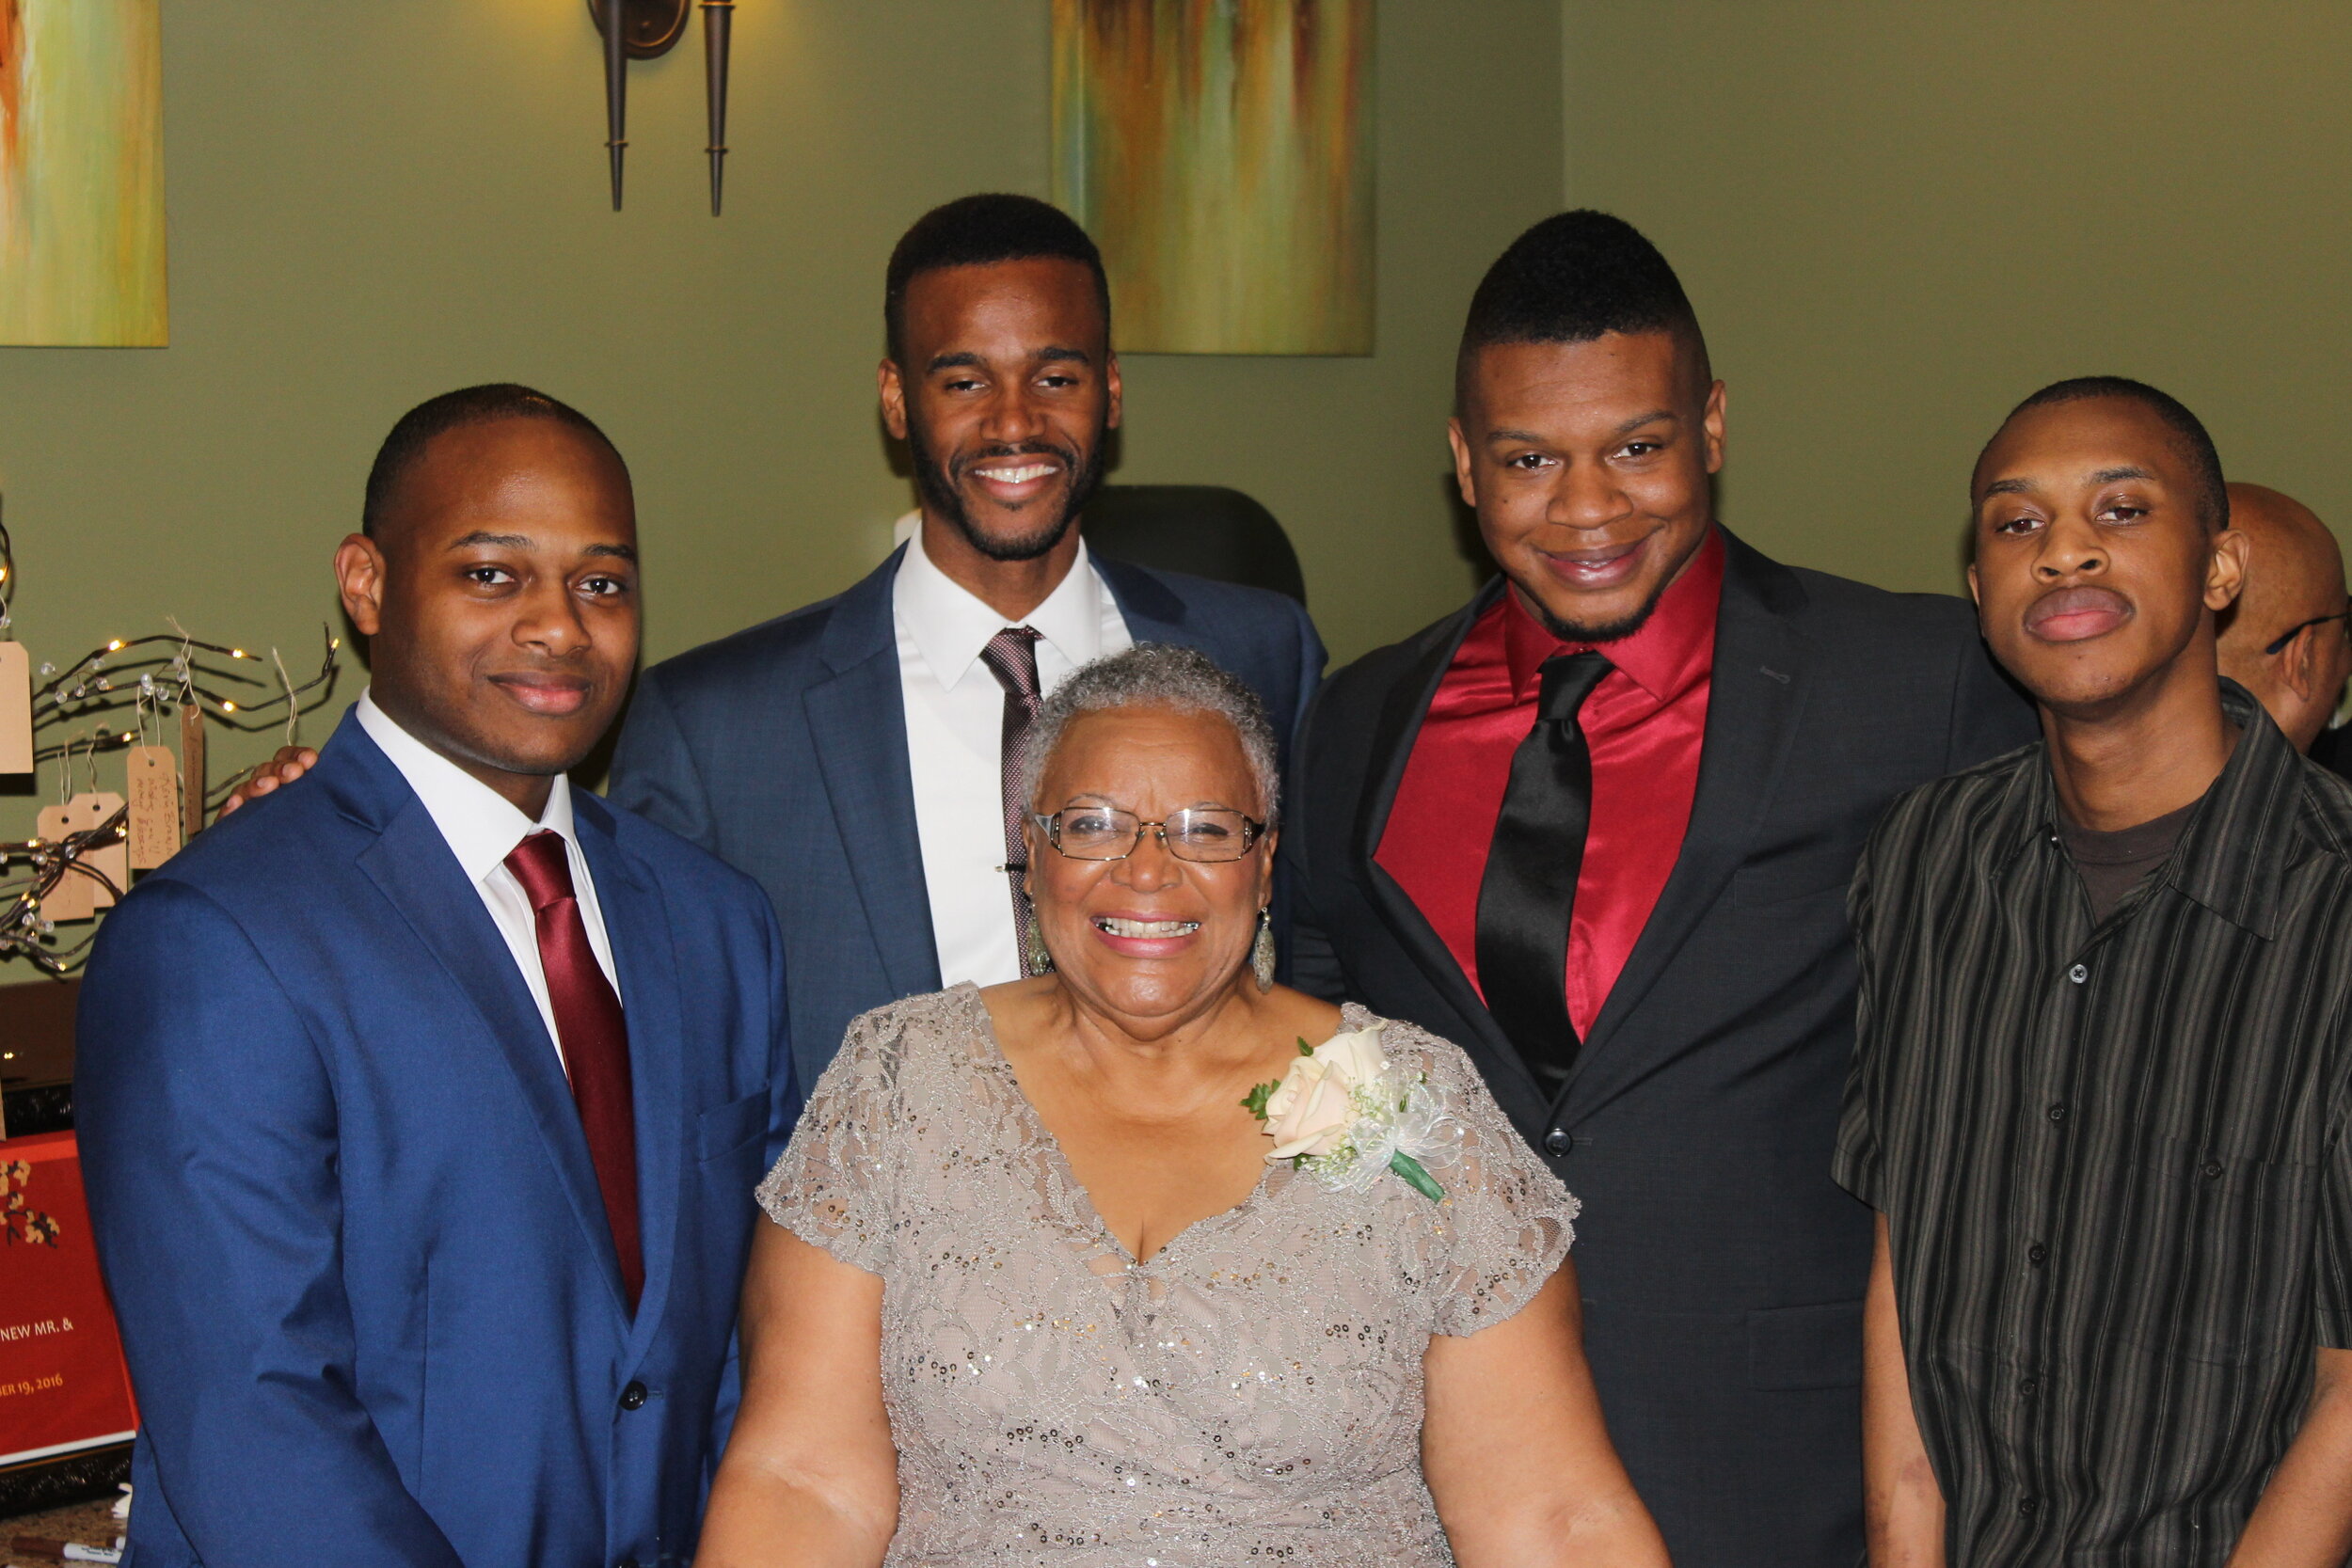 Gram with four of her grandsons